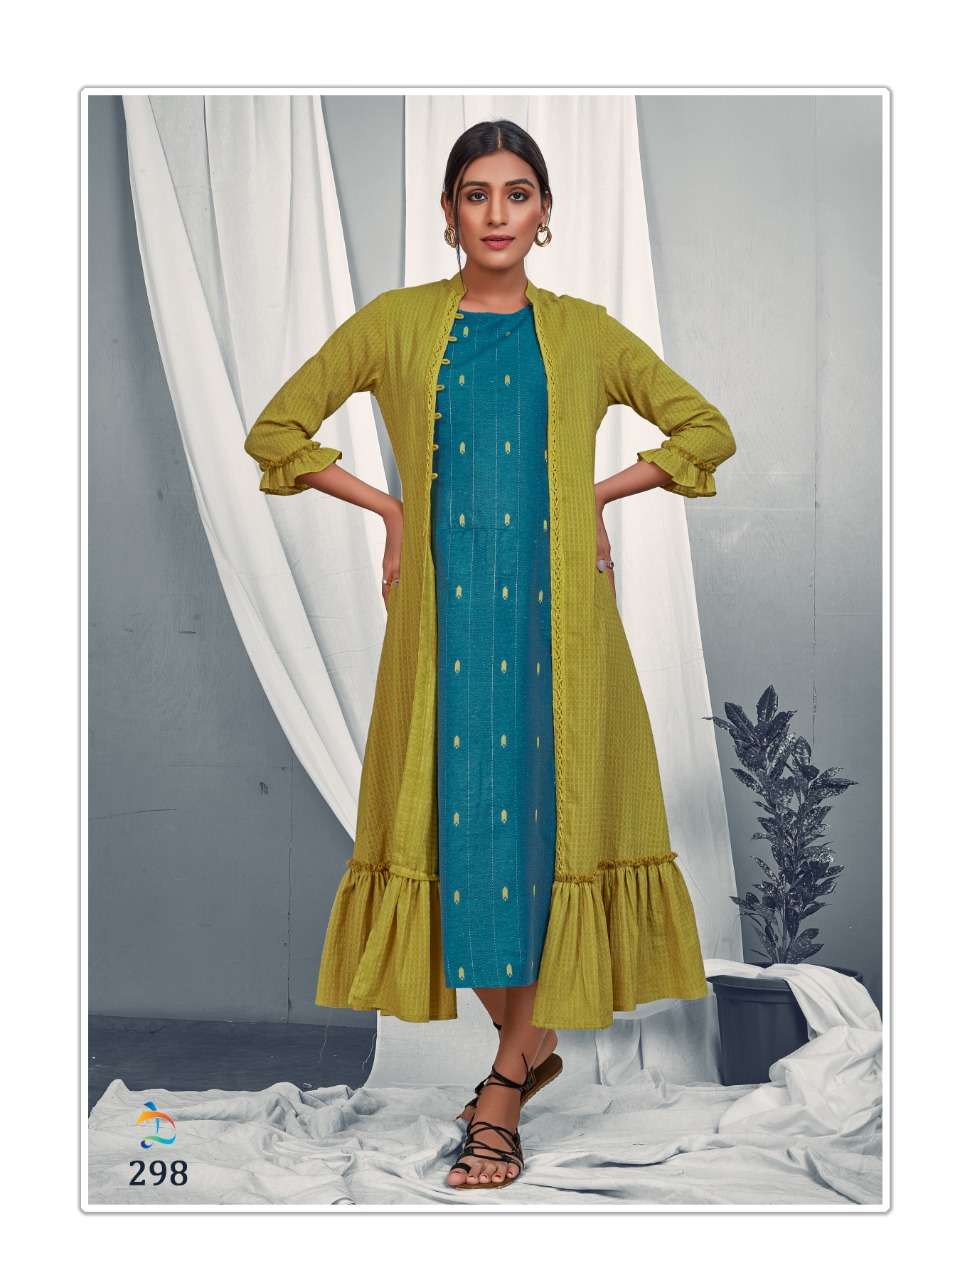 MAPLE BY DOVI FASHION 295 TO 298 SERIES DESIGNER STYLISH FANCY COLORFUL BEAUTIFUL PARTY WEAR & ETHNIC WEAR COLLECTION RAYON/COTTON KURTIS WITH JACKETS AT WHOLESALE PRICE